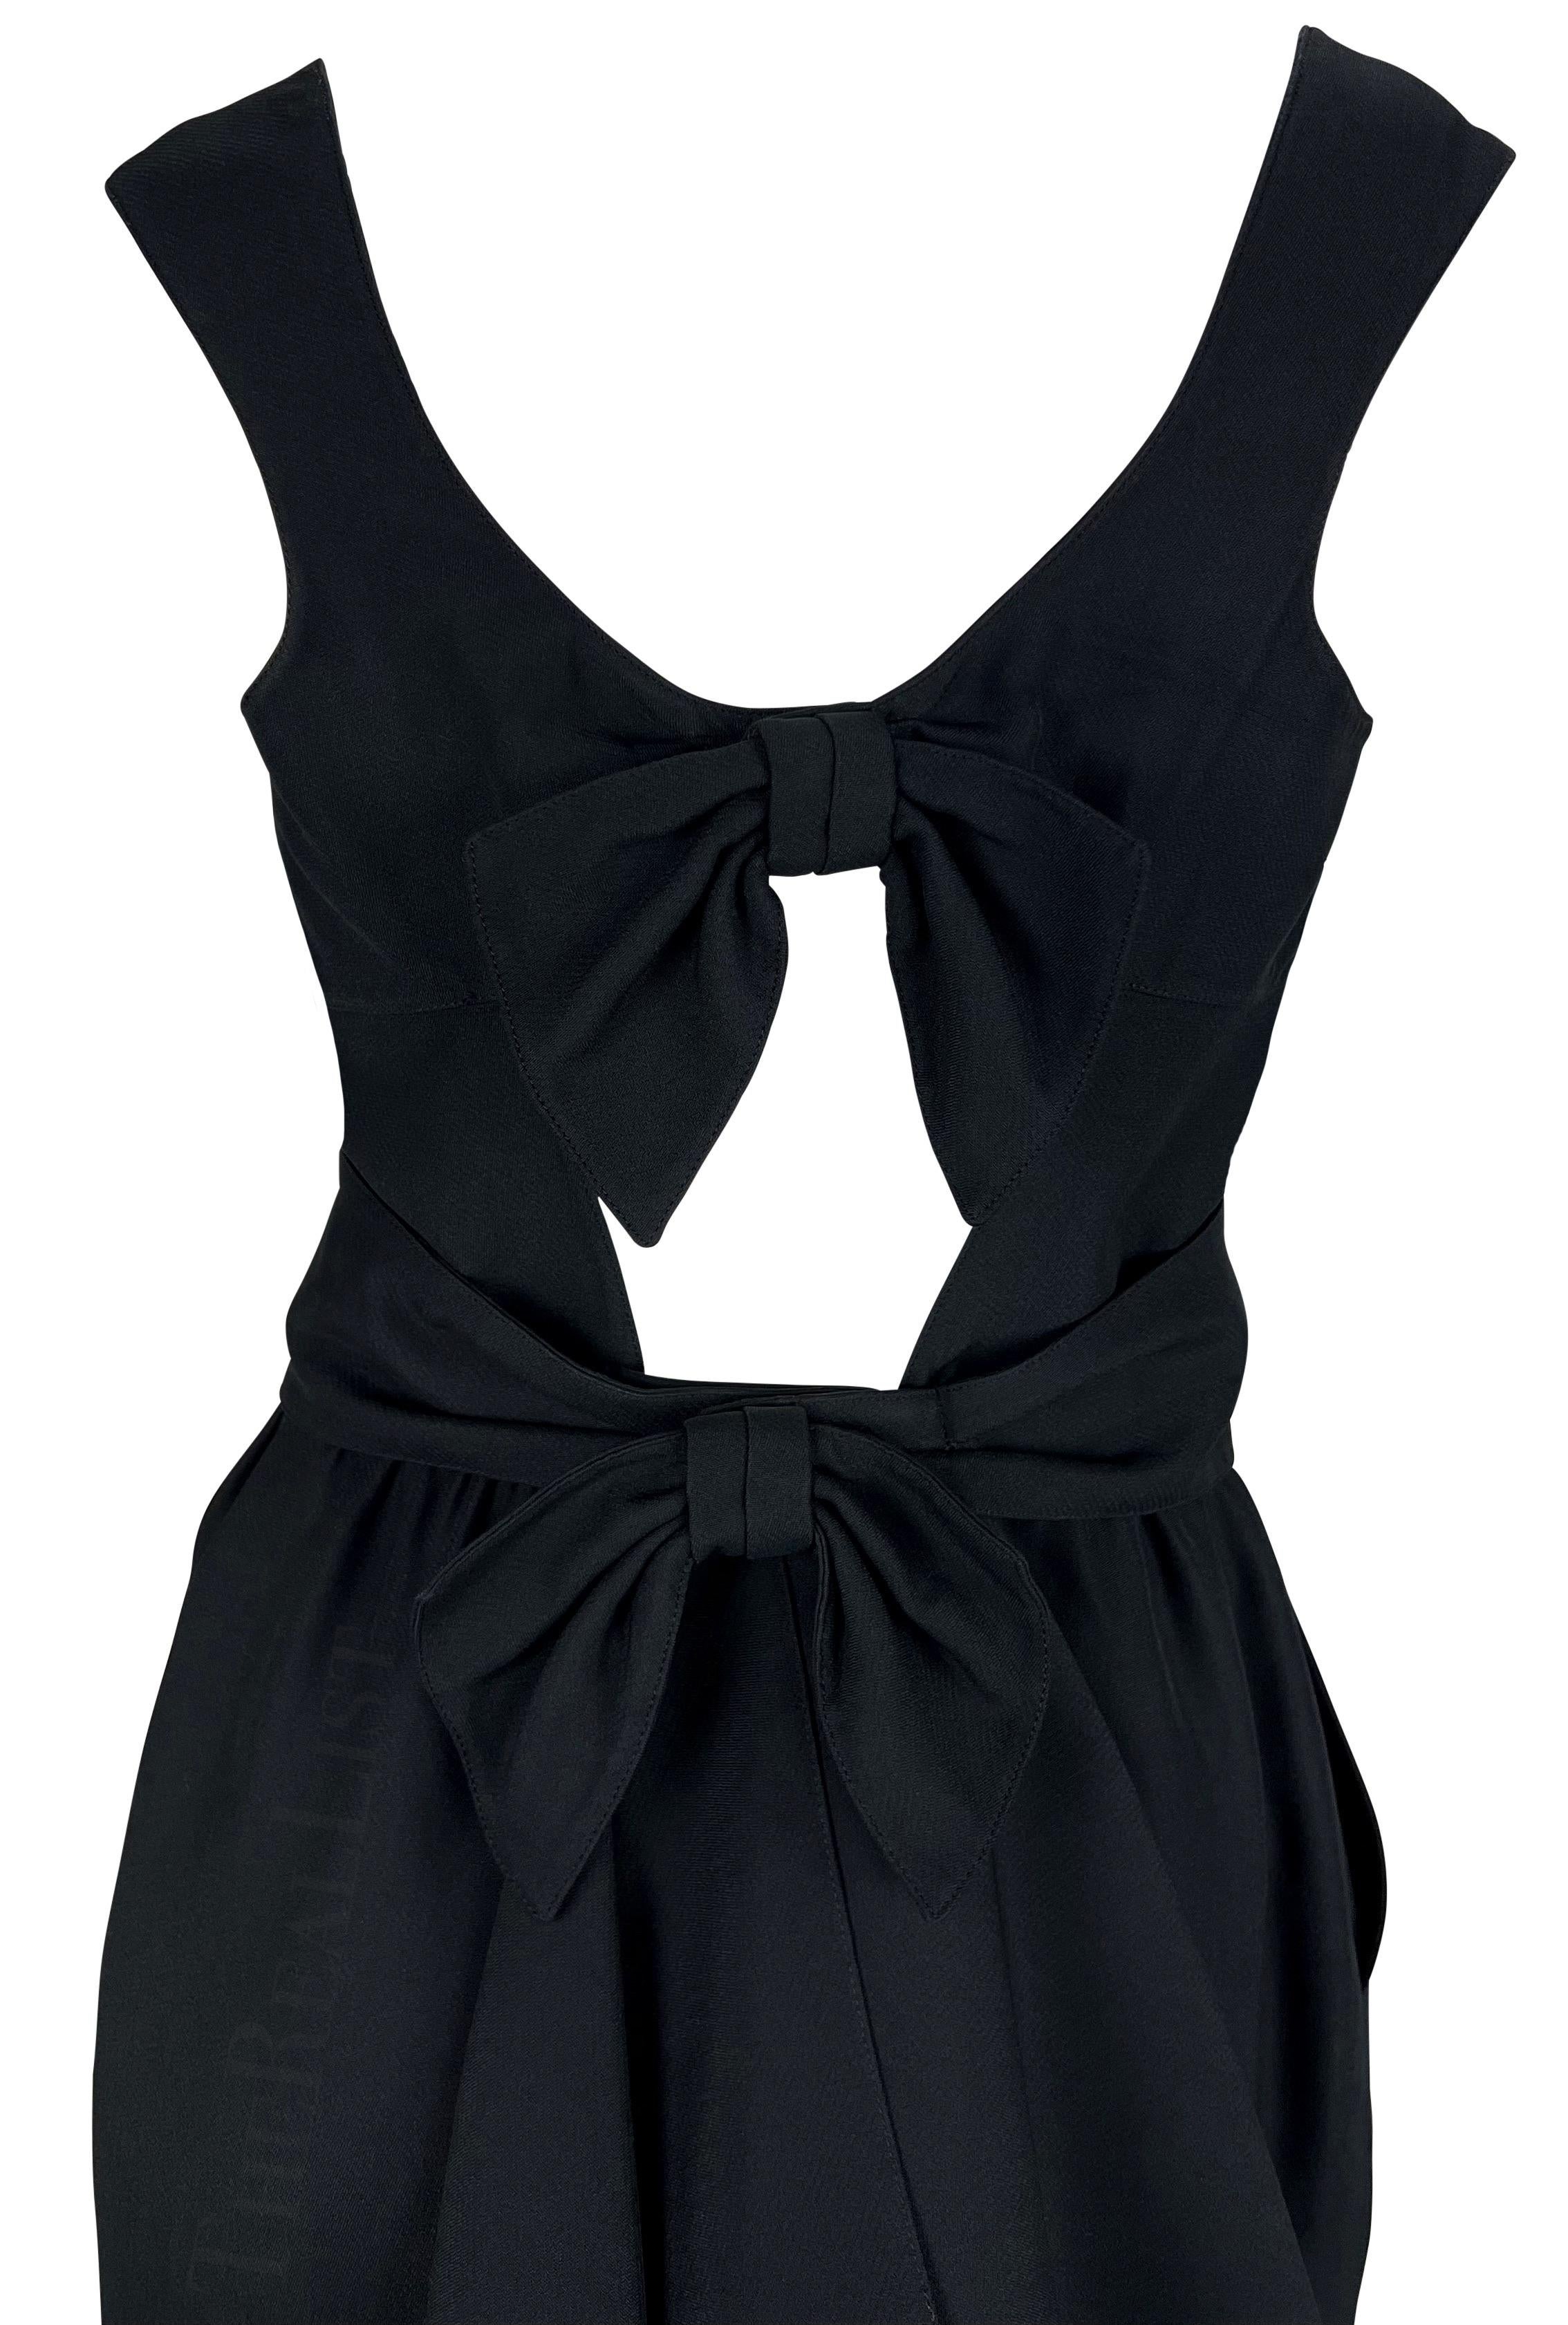 Presenting a fabulous black Thierry Mugler mini dress, designed by Manfred Mugler. From the early 1990s, this little black dress features an angular scoop neckline and waist belt. The dress is made complete with a semi-exposed back accented with two